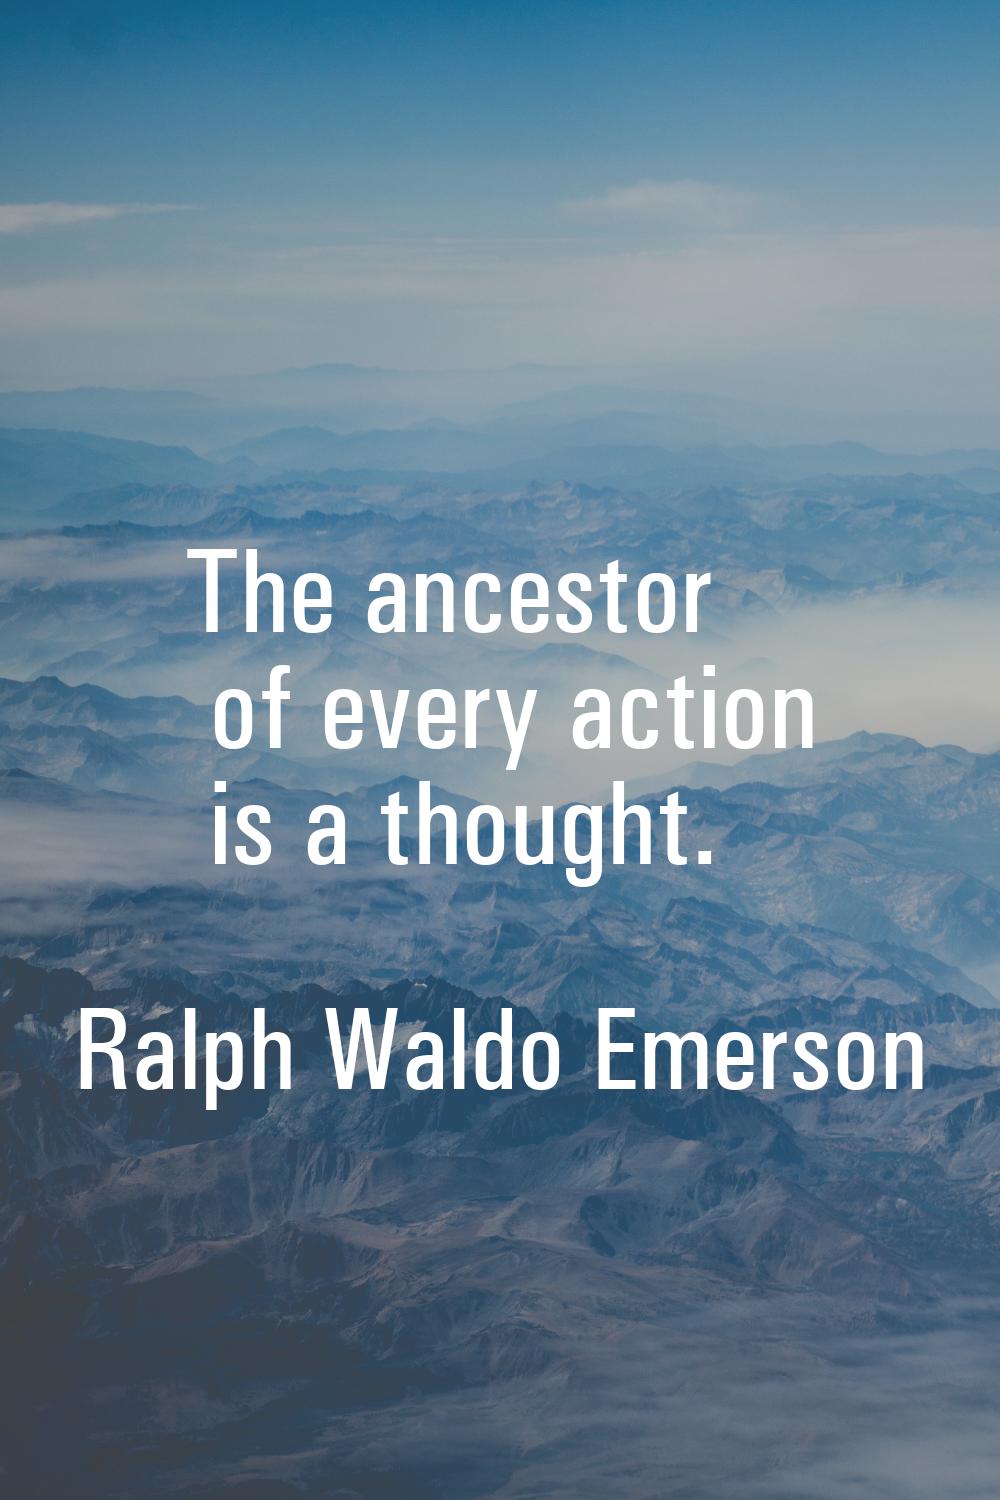 The ancestor of every action is a thought.